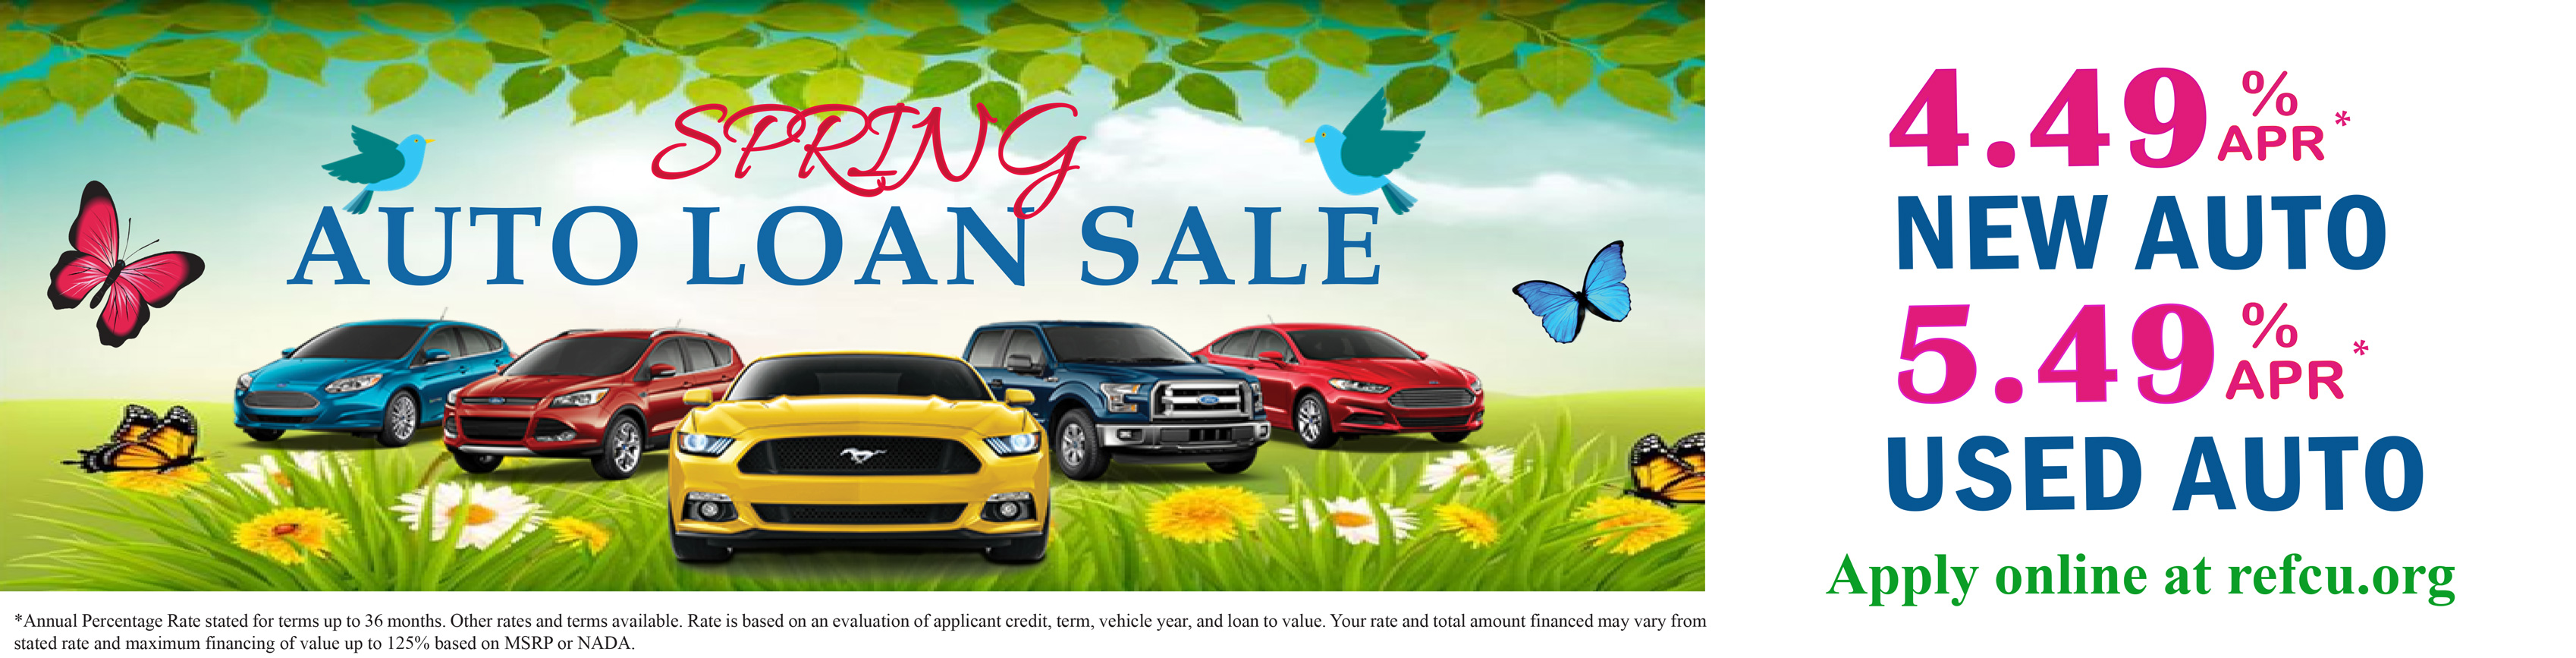 Spring auto loan sale. Rates as low as 4.49% APR